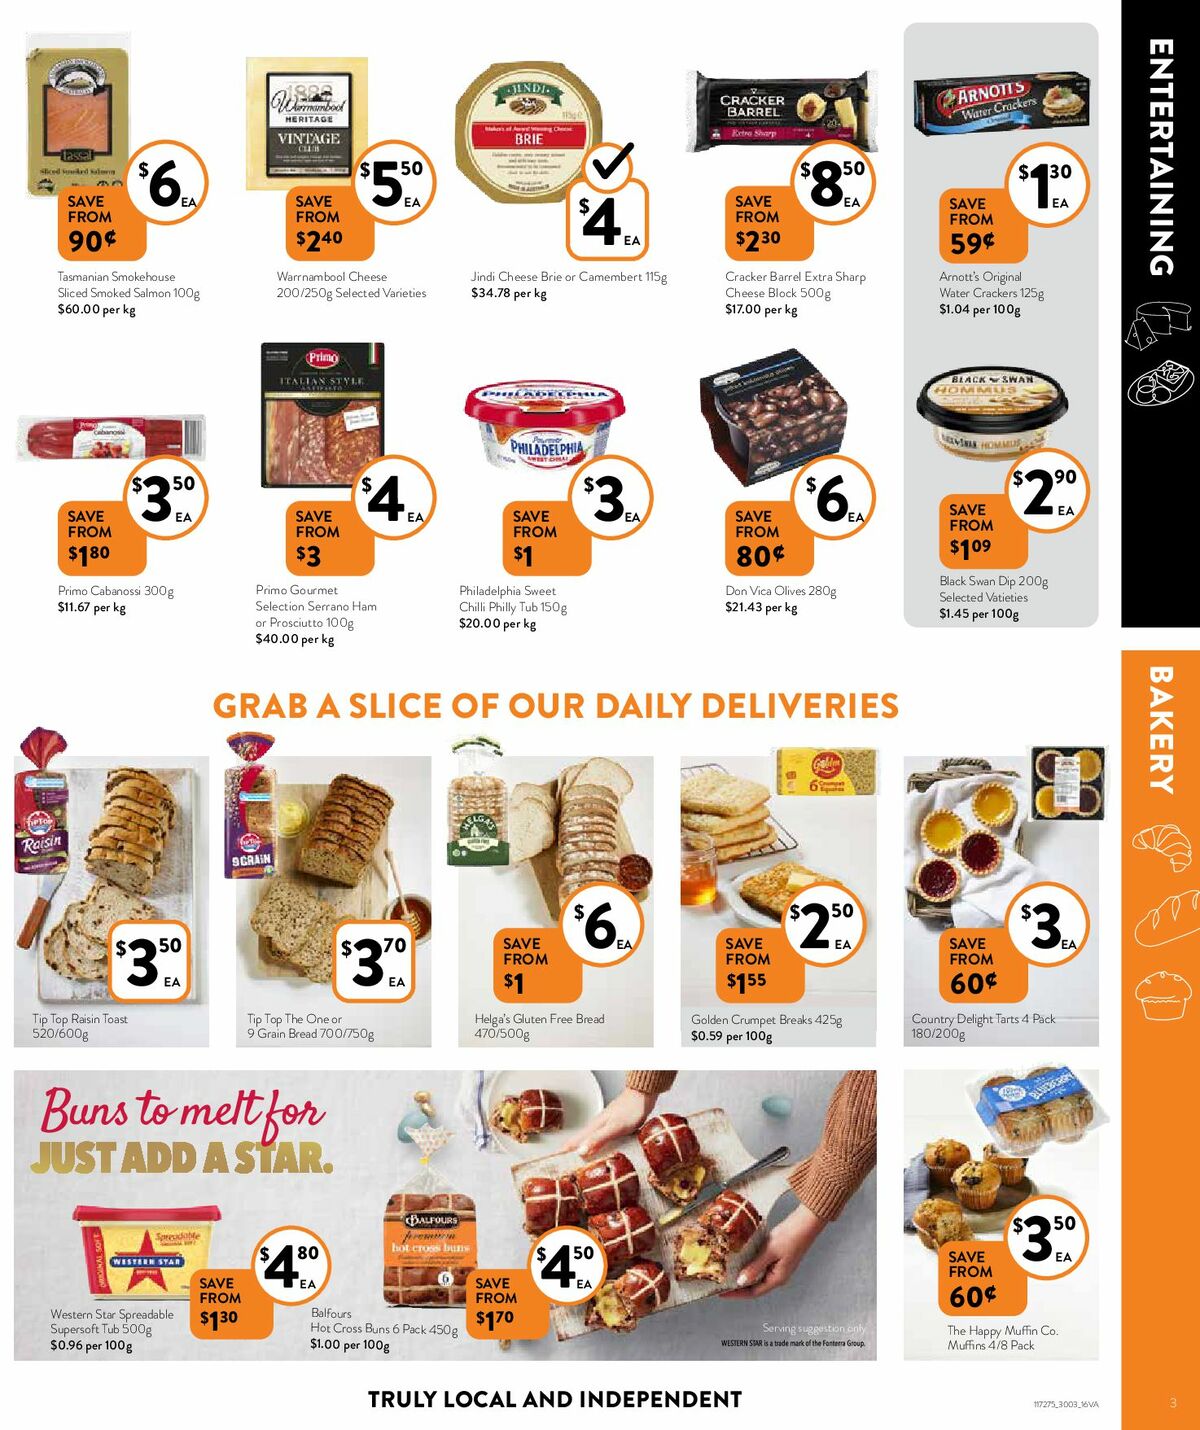 FoodWorks Supermarket Catalogues from 30 March